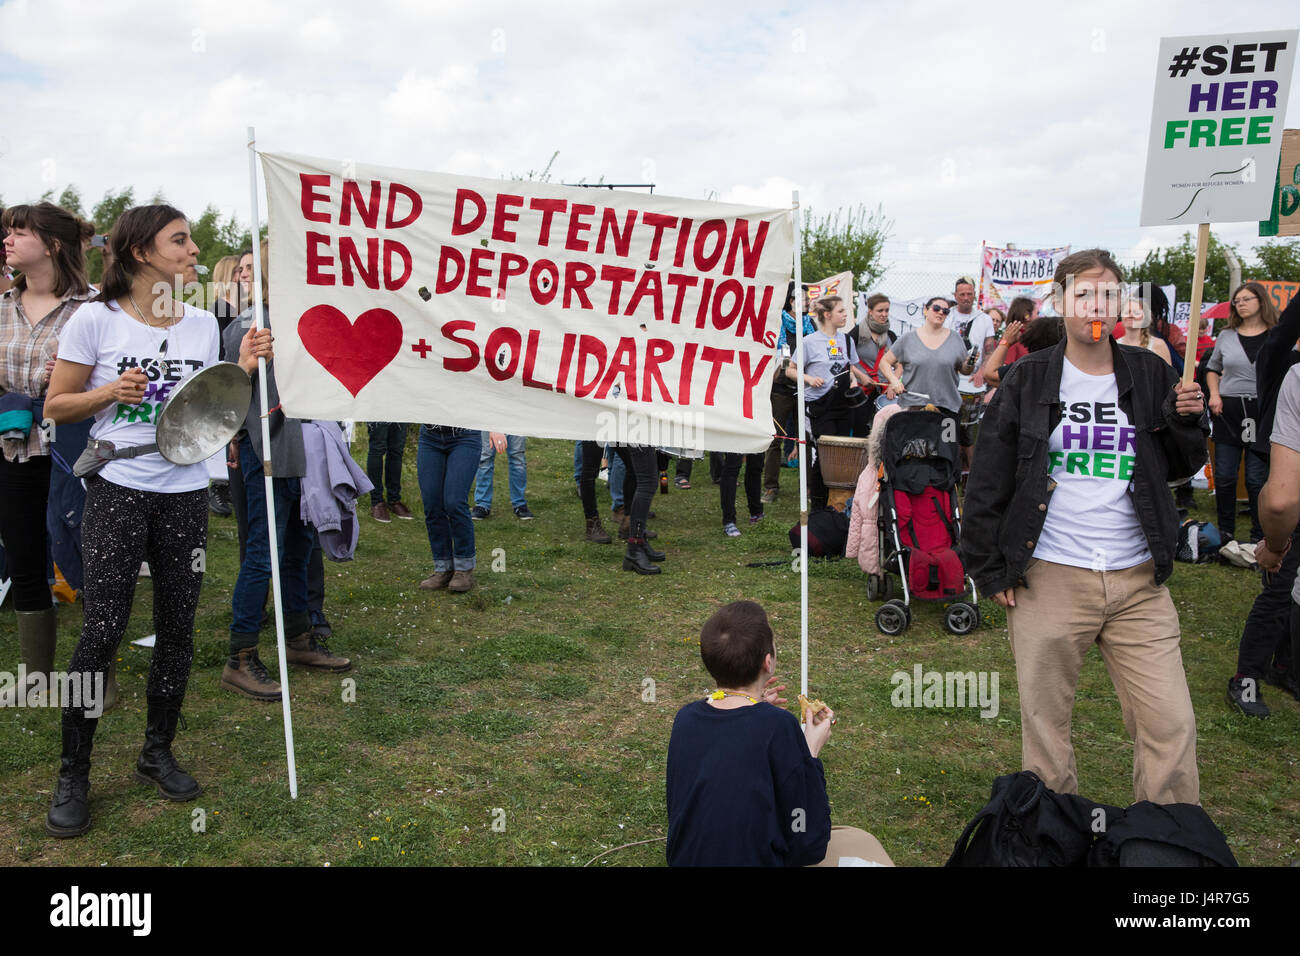 Milton Ernest, UK. 13th May, 2017. Over a thousand campaigners against immigration detention attend a protest organised by Movement For Justice By Any Means Necessary outside Yarl's Wood Immigration Removal Centre. Campaigners, including former detainees, called for all immigration detention centres to be closed. Credit: Mark Kerrison/Alamy Live News Stock Photo